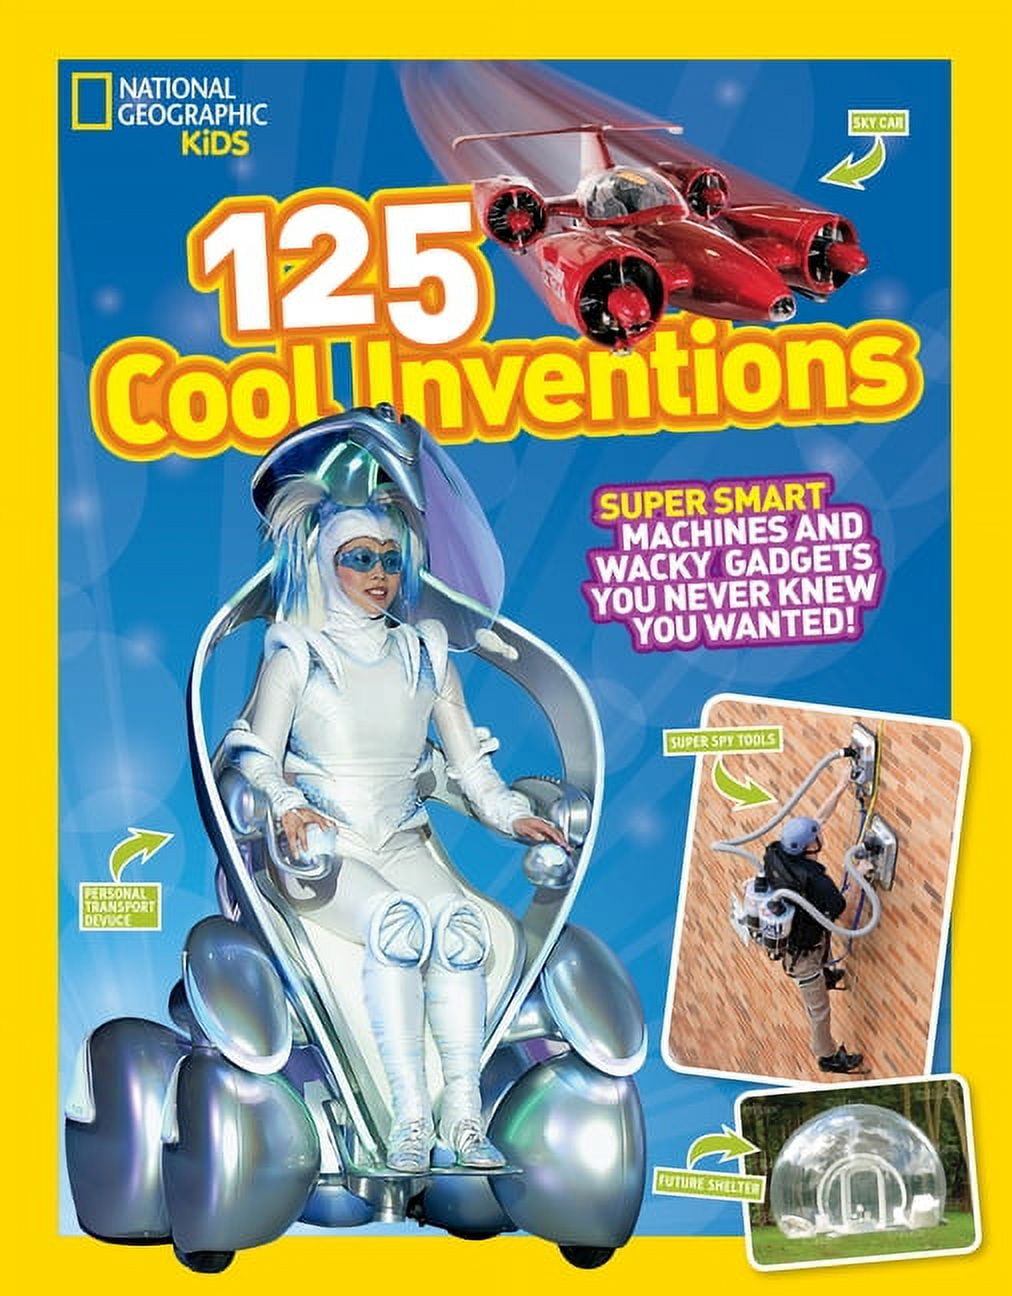 300 Mmm cool ideas  cool gadgets, gadgets and gizmos, inventions